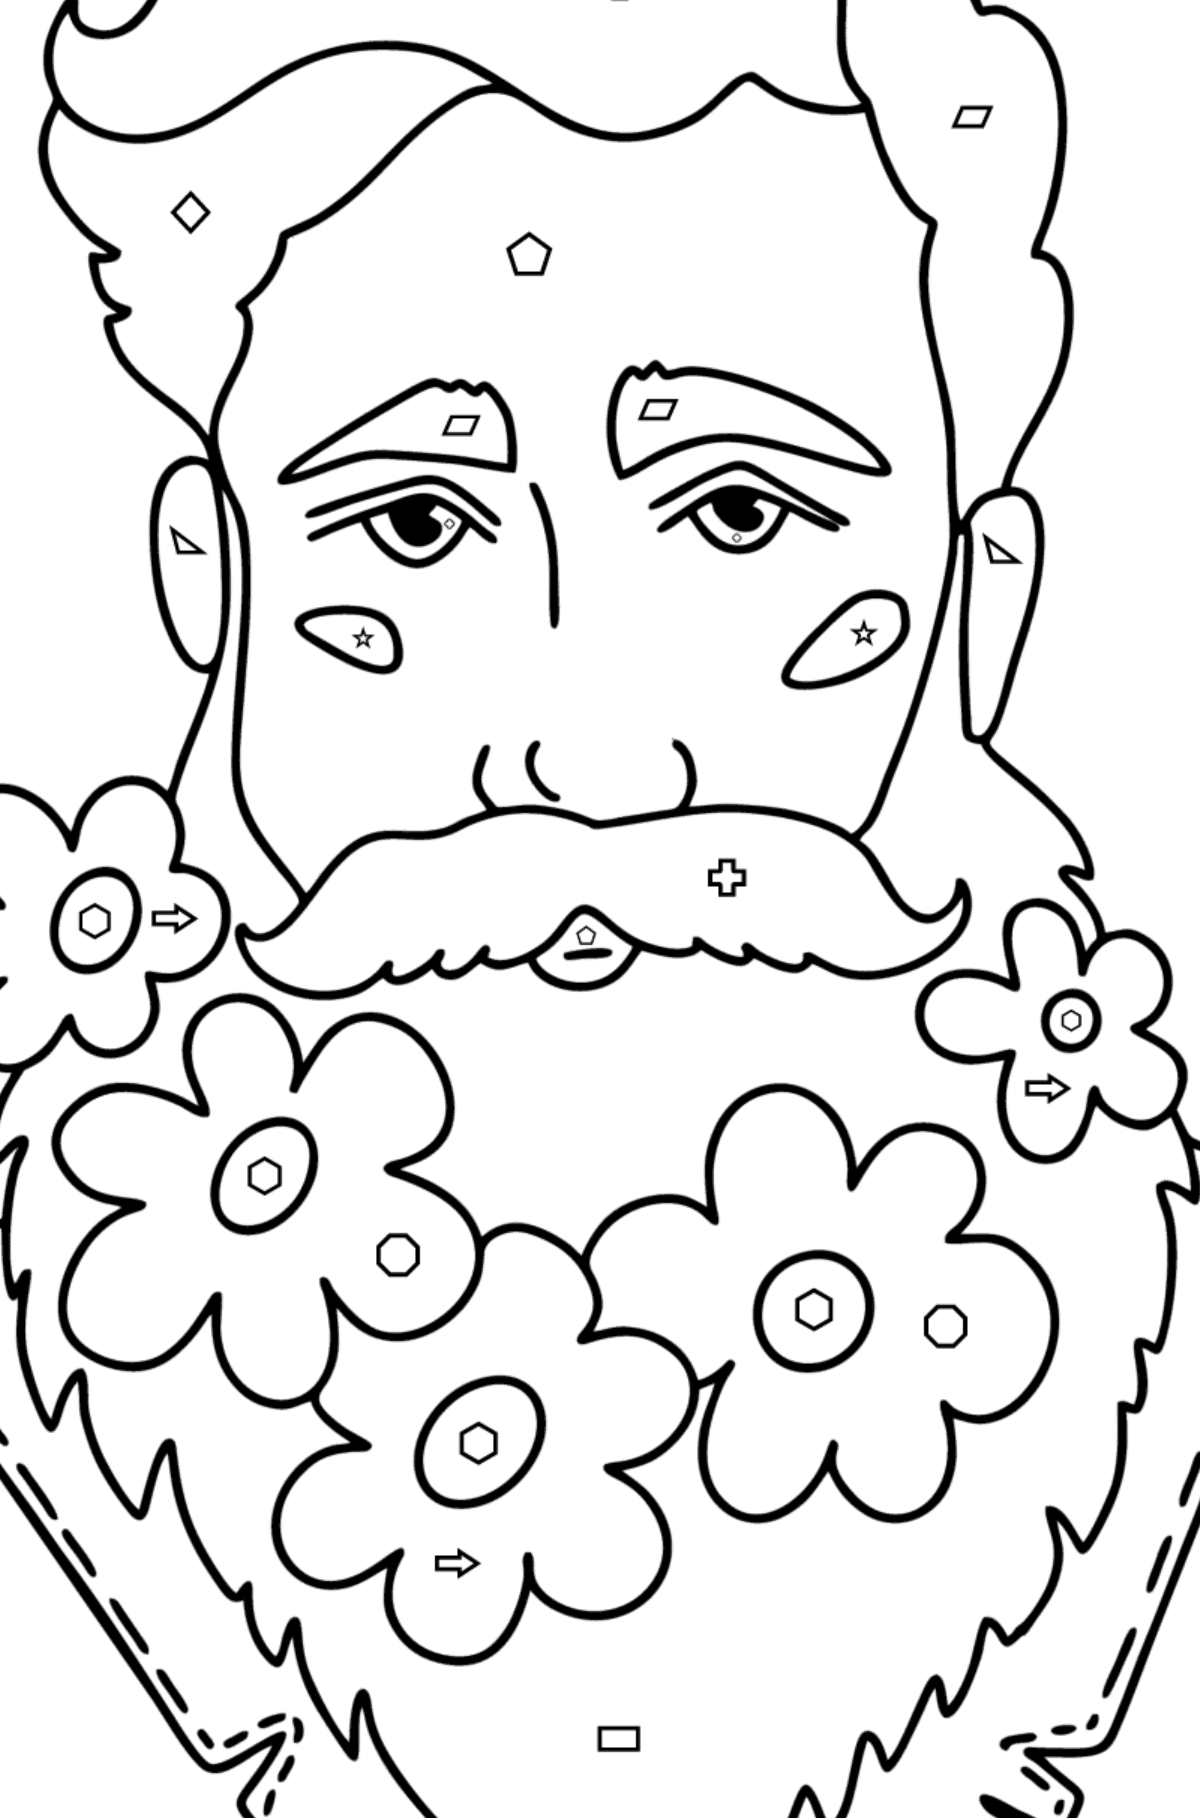 Young man with a beard сoloring page - Coloring by Geometric Shapes for Kids